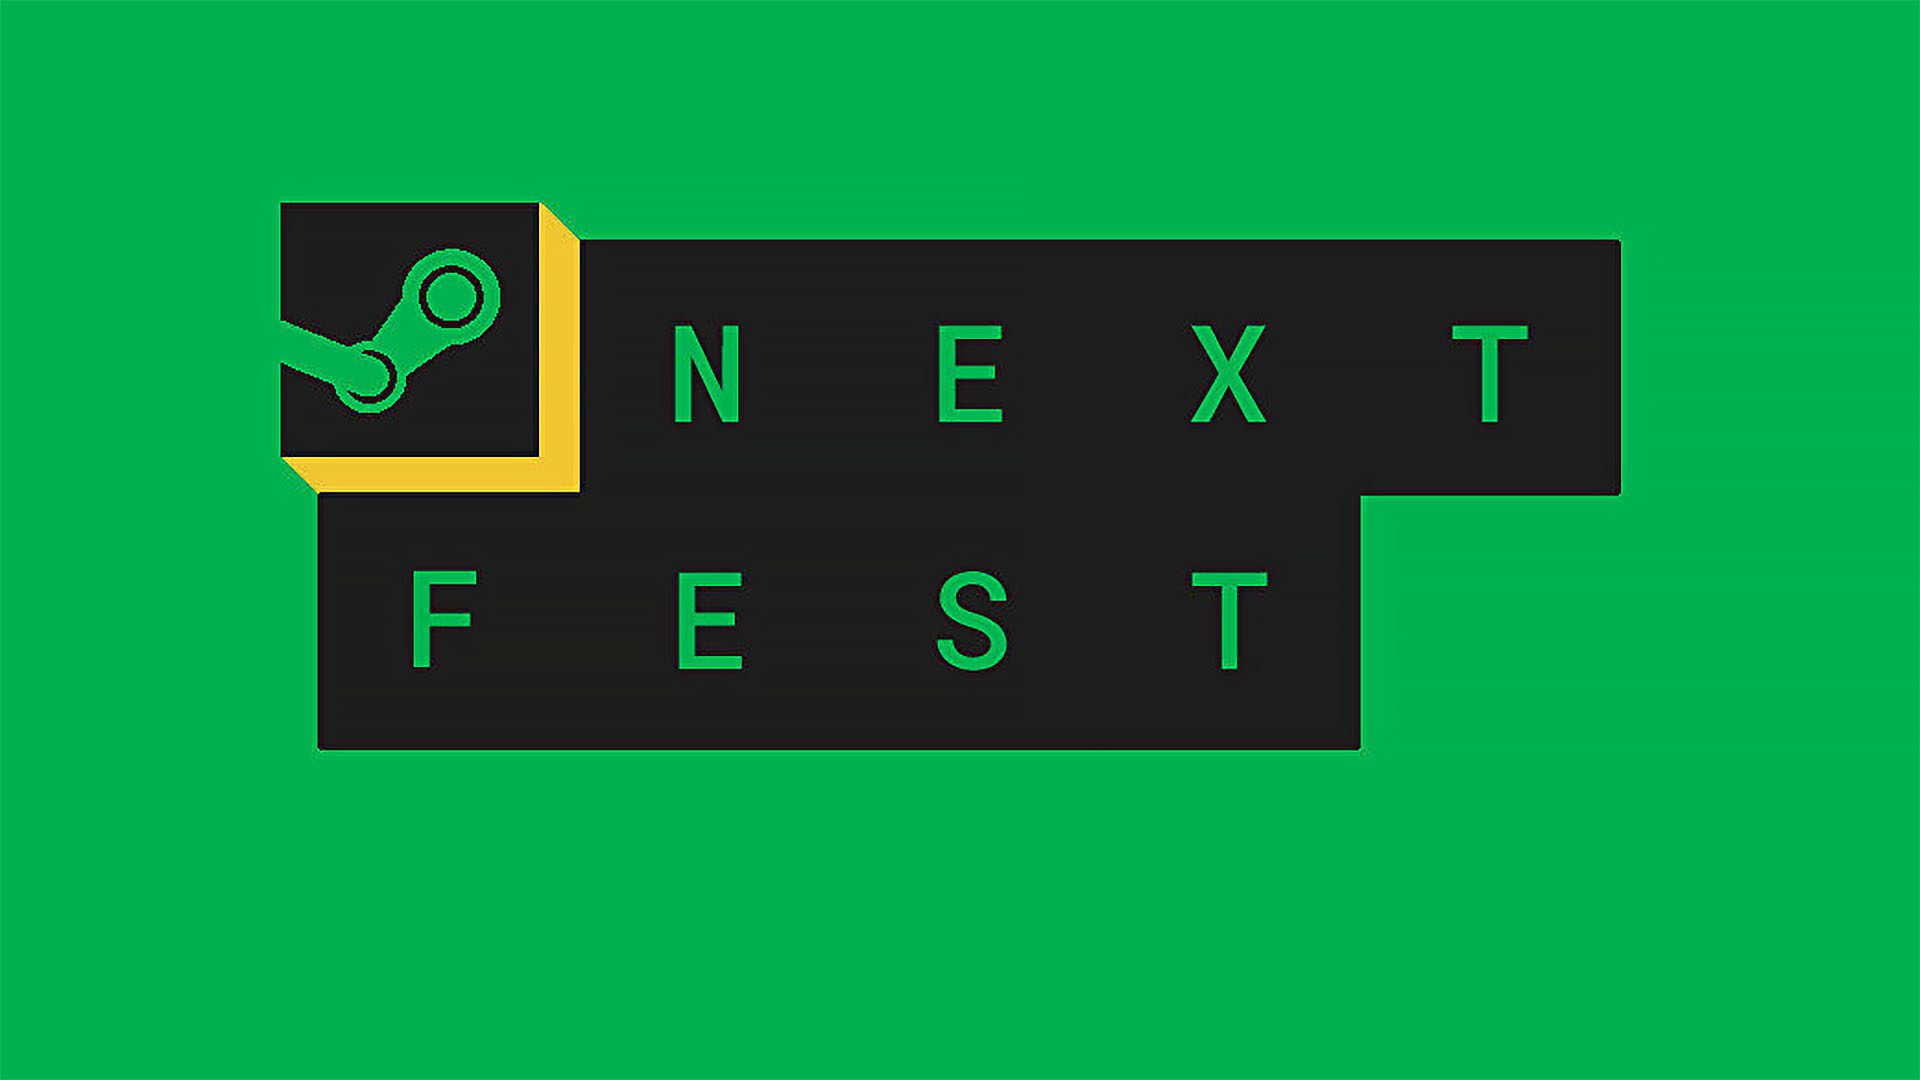 Steam Next Fest announced for June this year iGamesNews